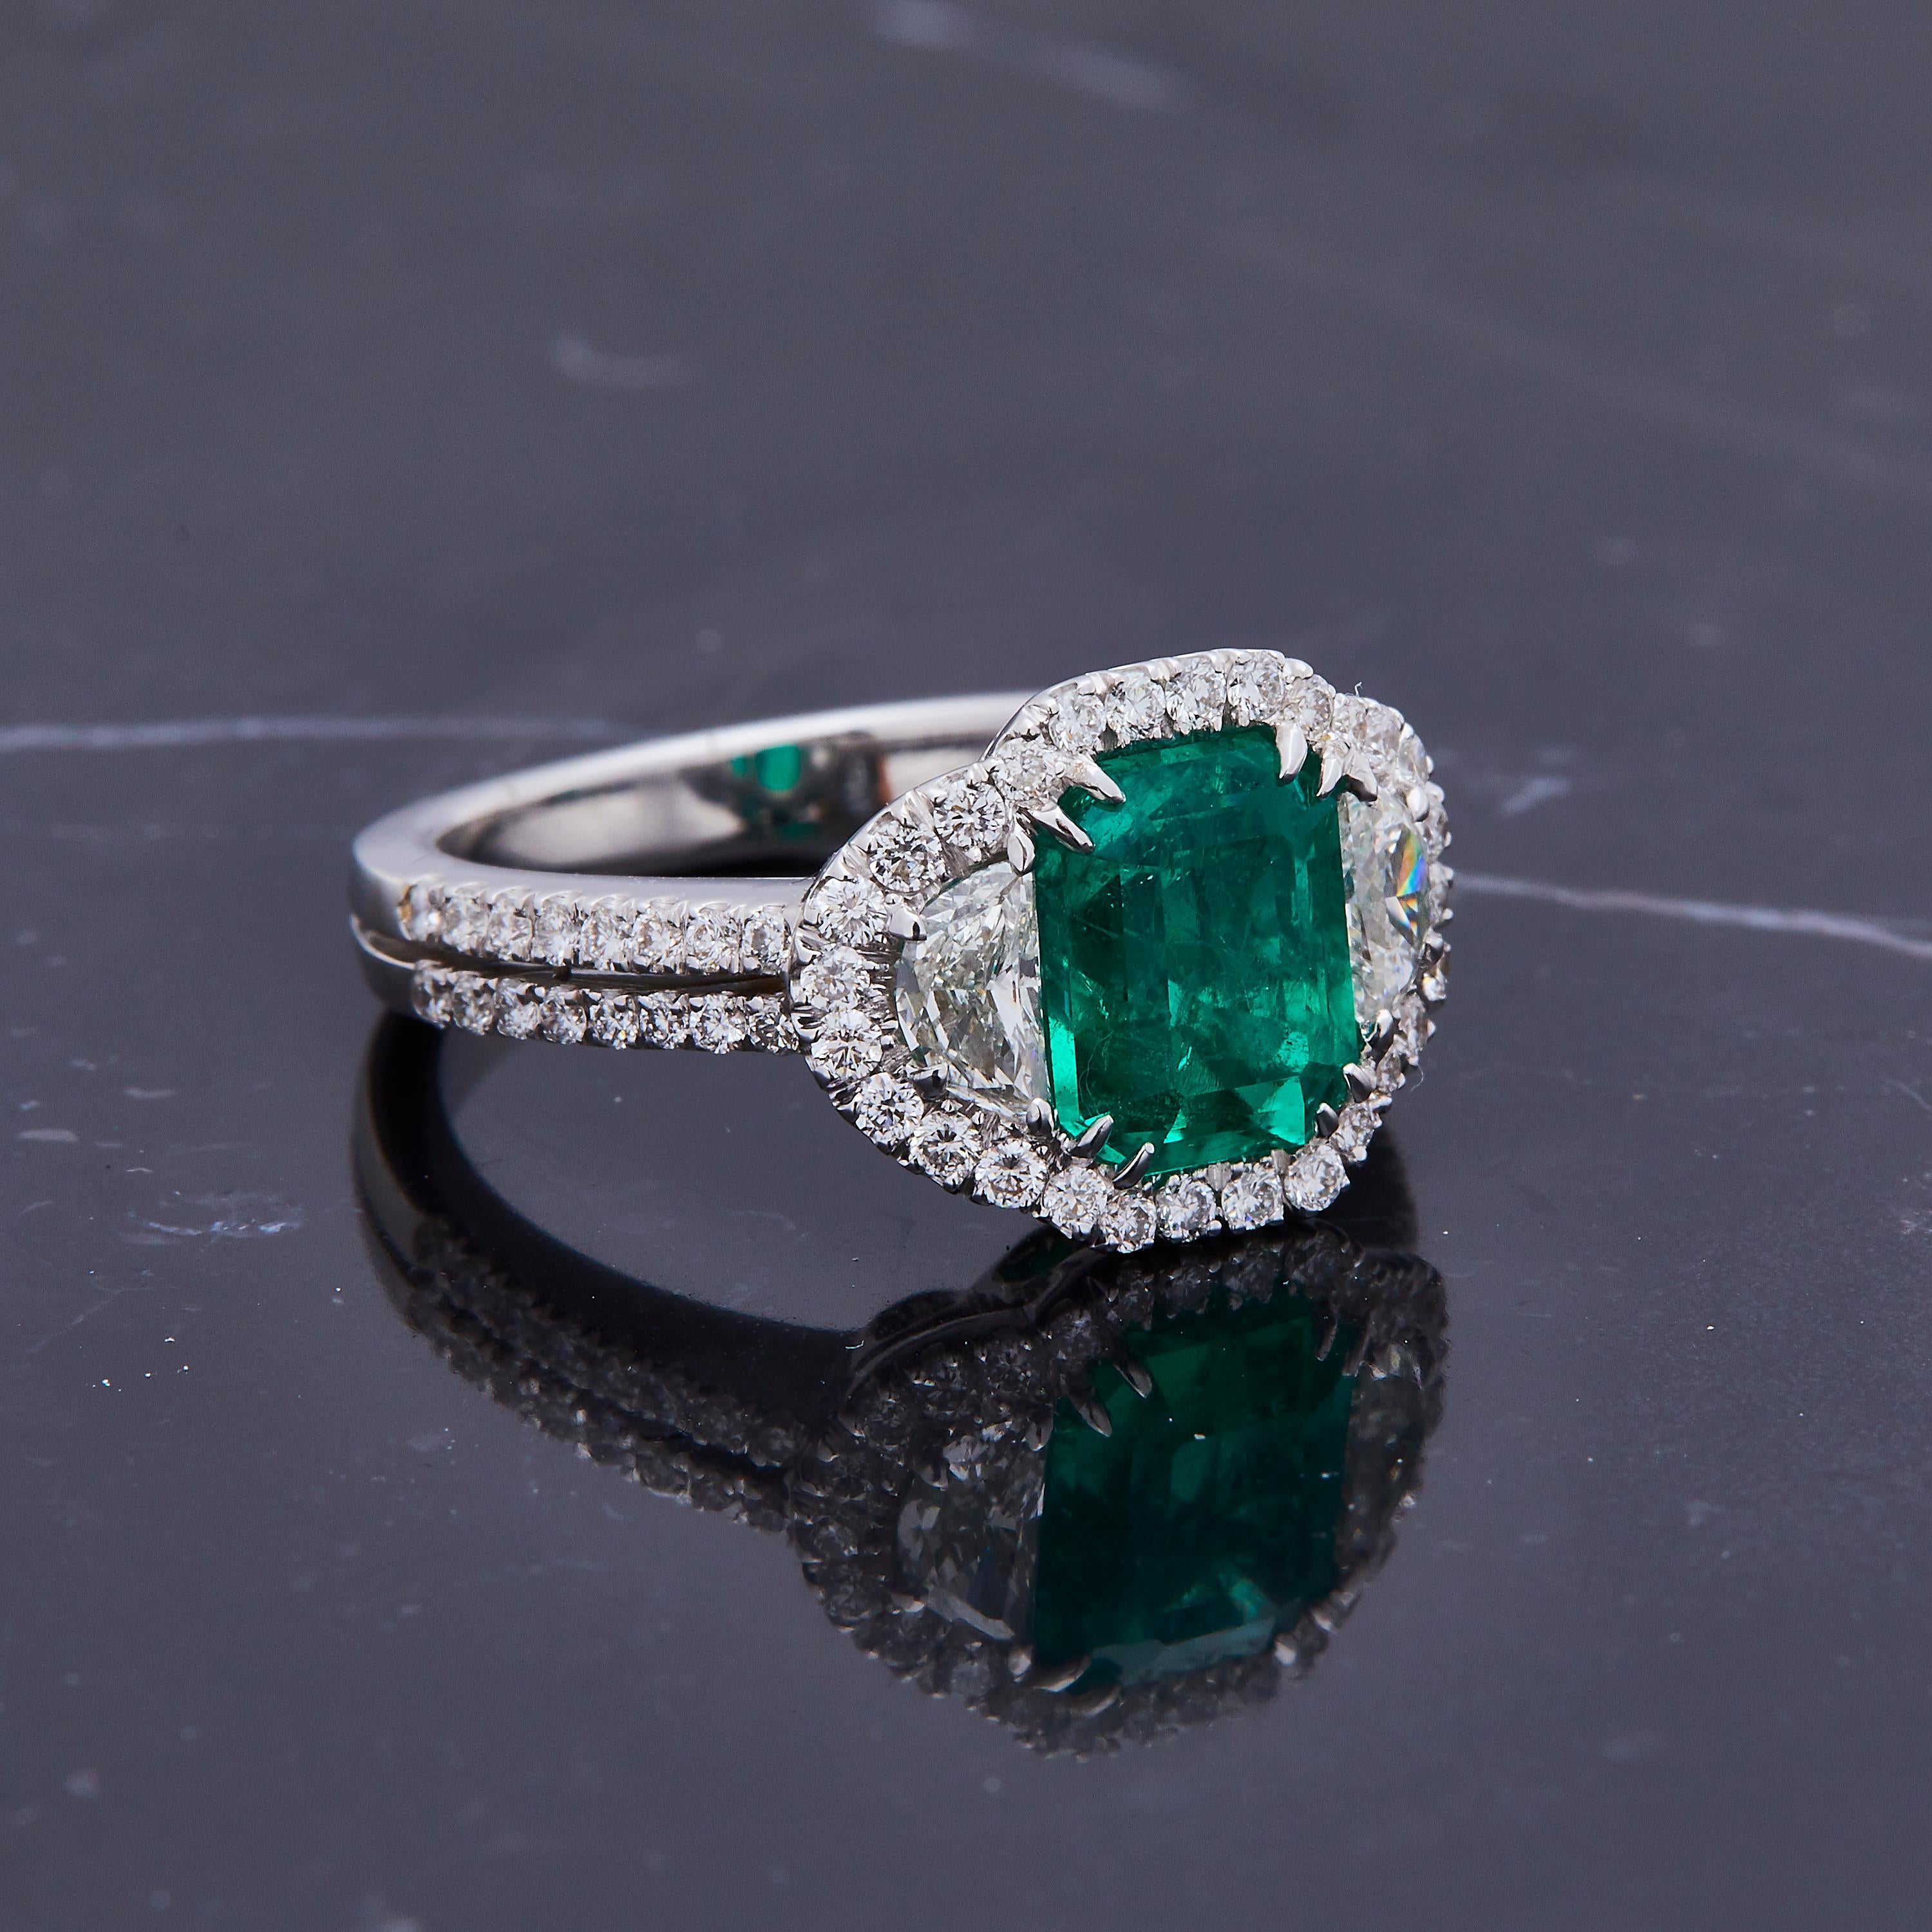 This modern classic ring features a 2.31ct lustrous high quality emerald. The center stone is flanked by gorgeous half moon diamonds on each side with a halo bordering around the edges and diamonds running down the double band. Its so timeless it